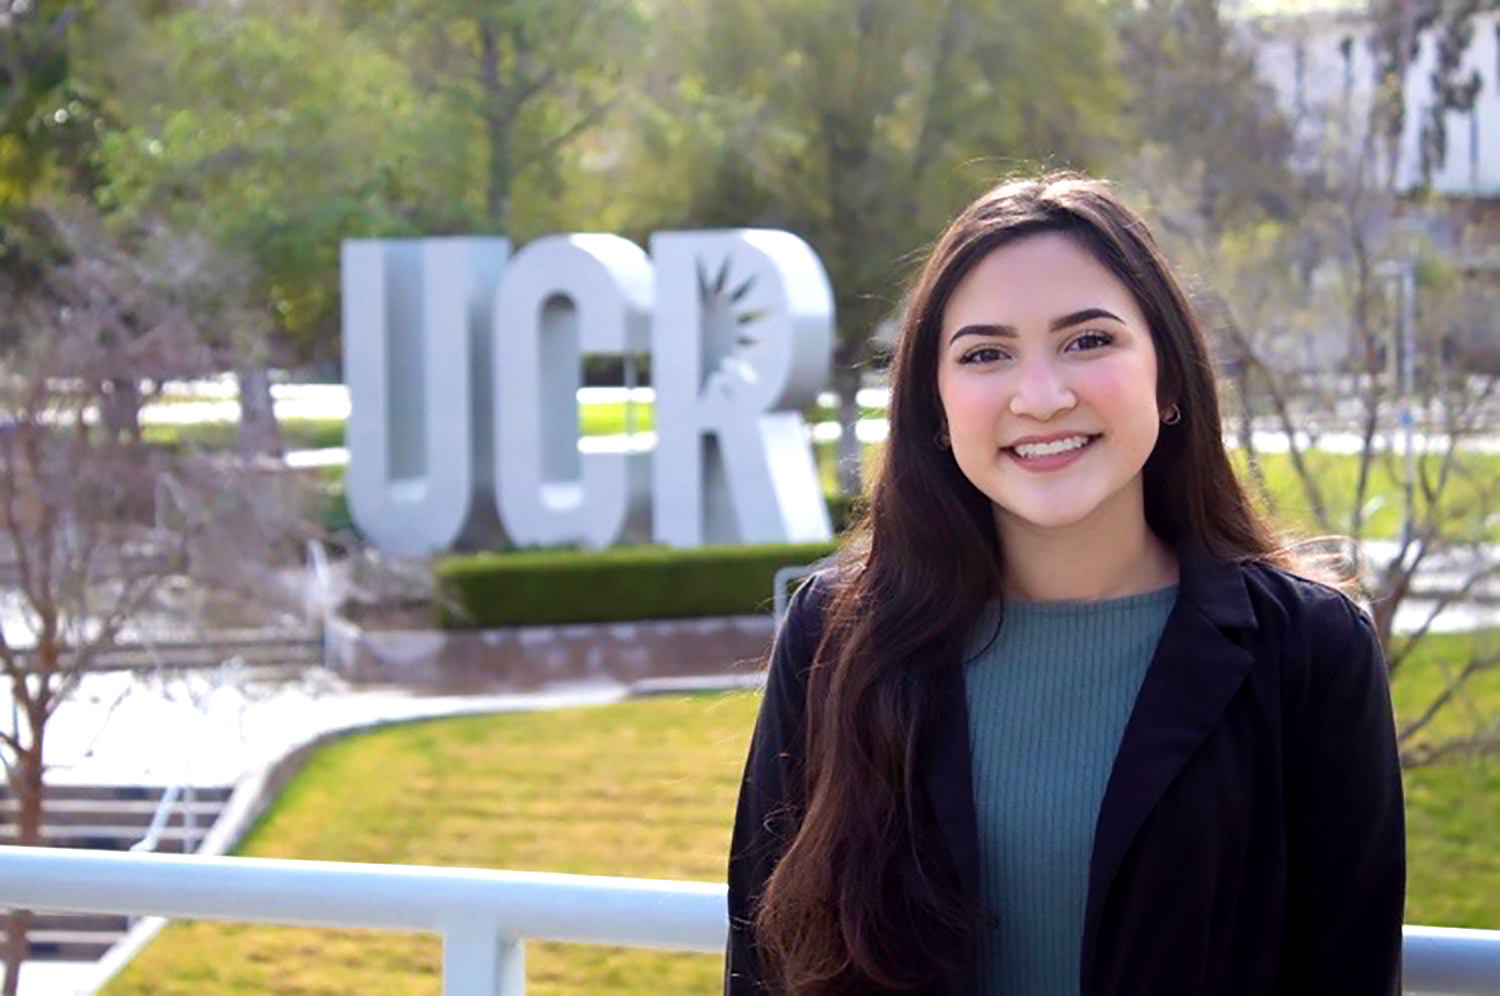 Alondra Martinez with UCR sign in the background